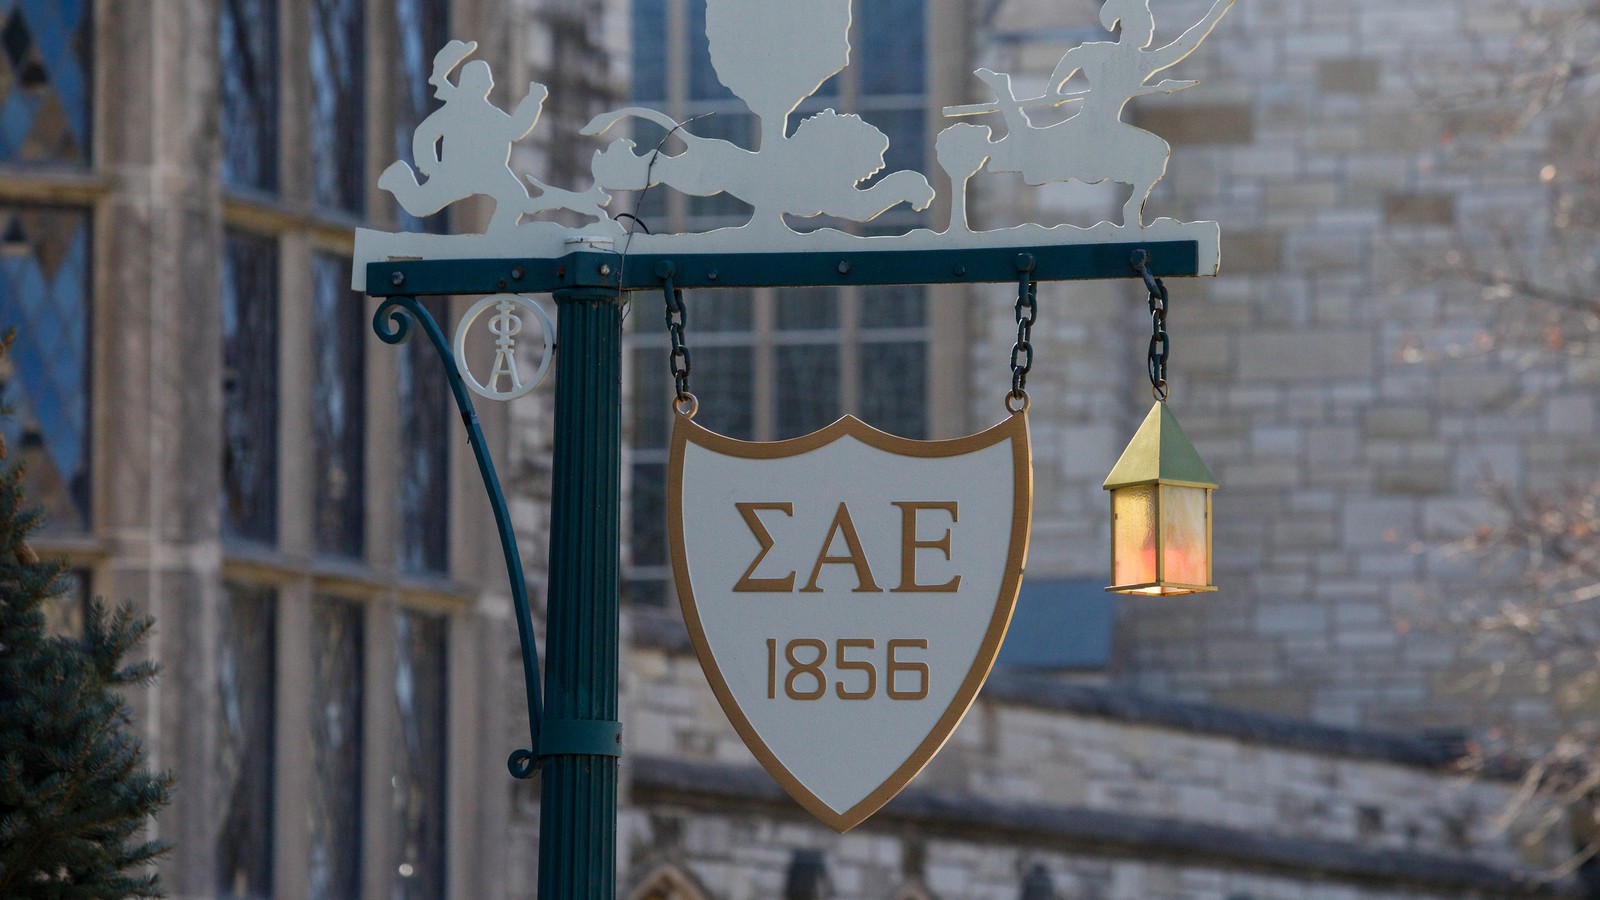 We Ranked The Best National Collegiate Fraternities So You Don't Have To